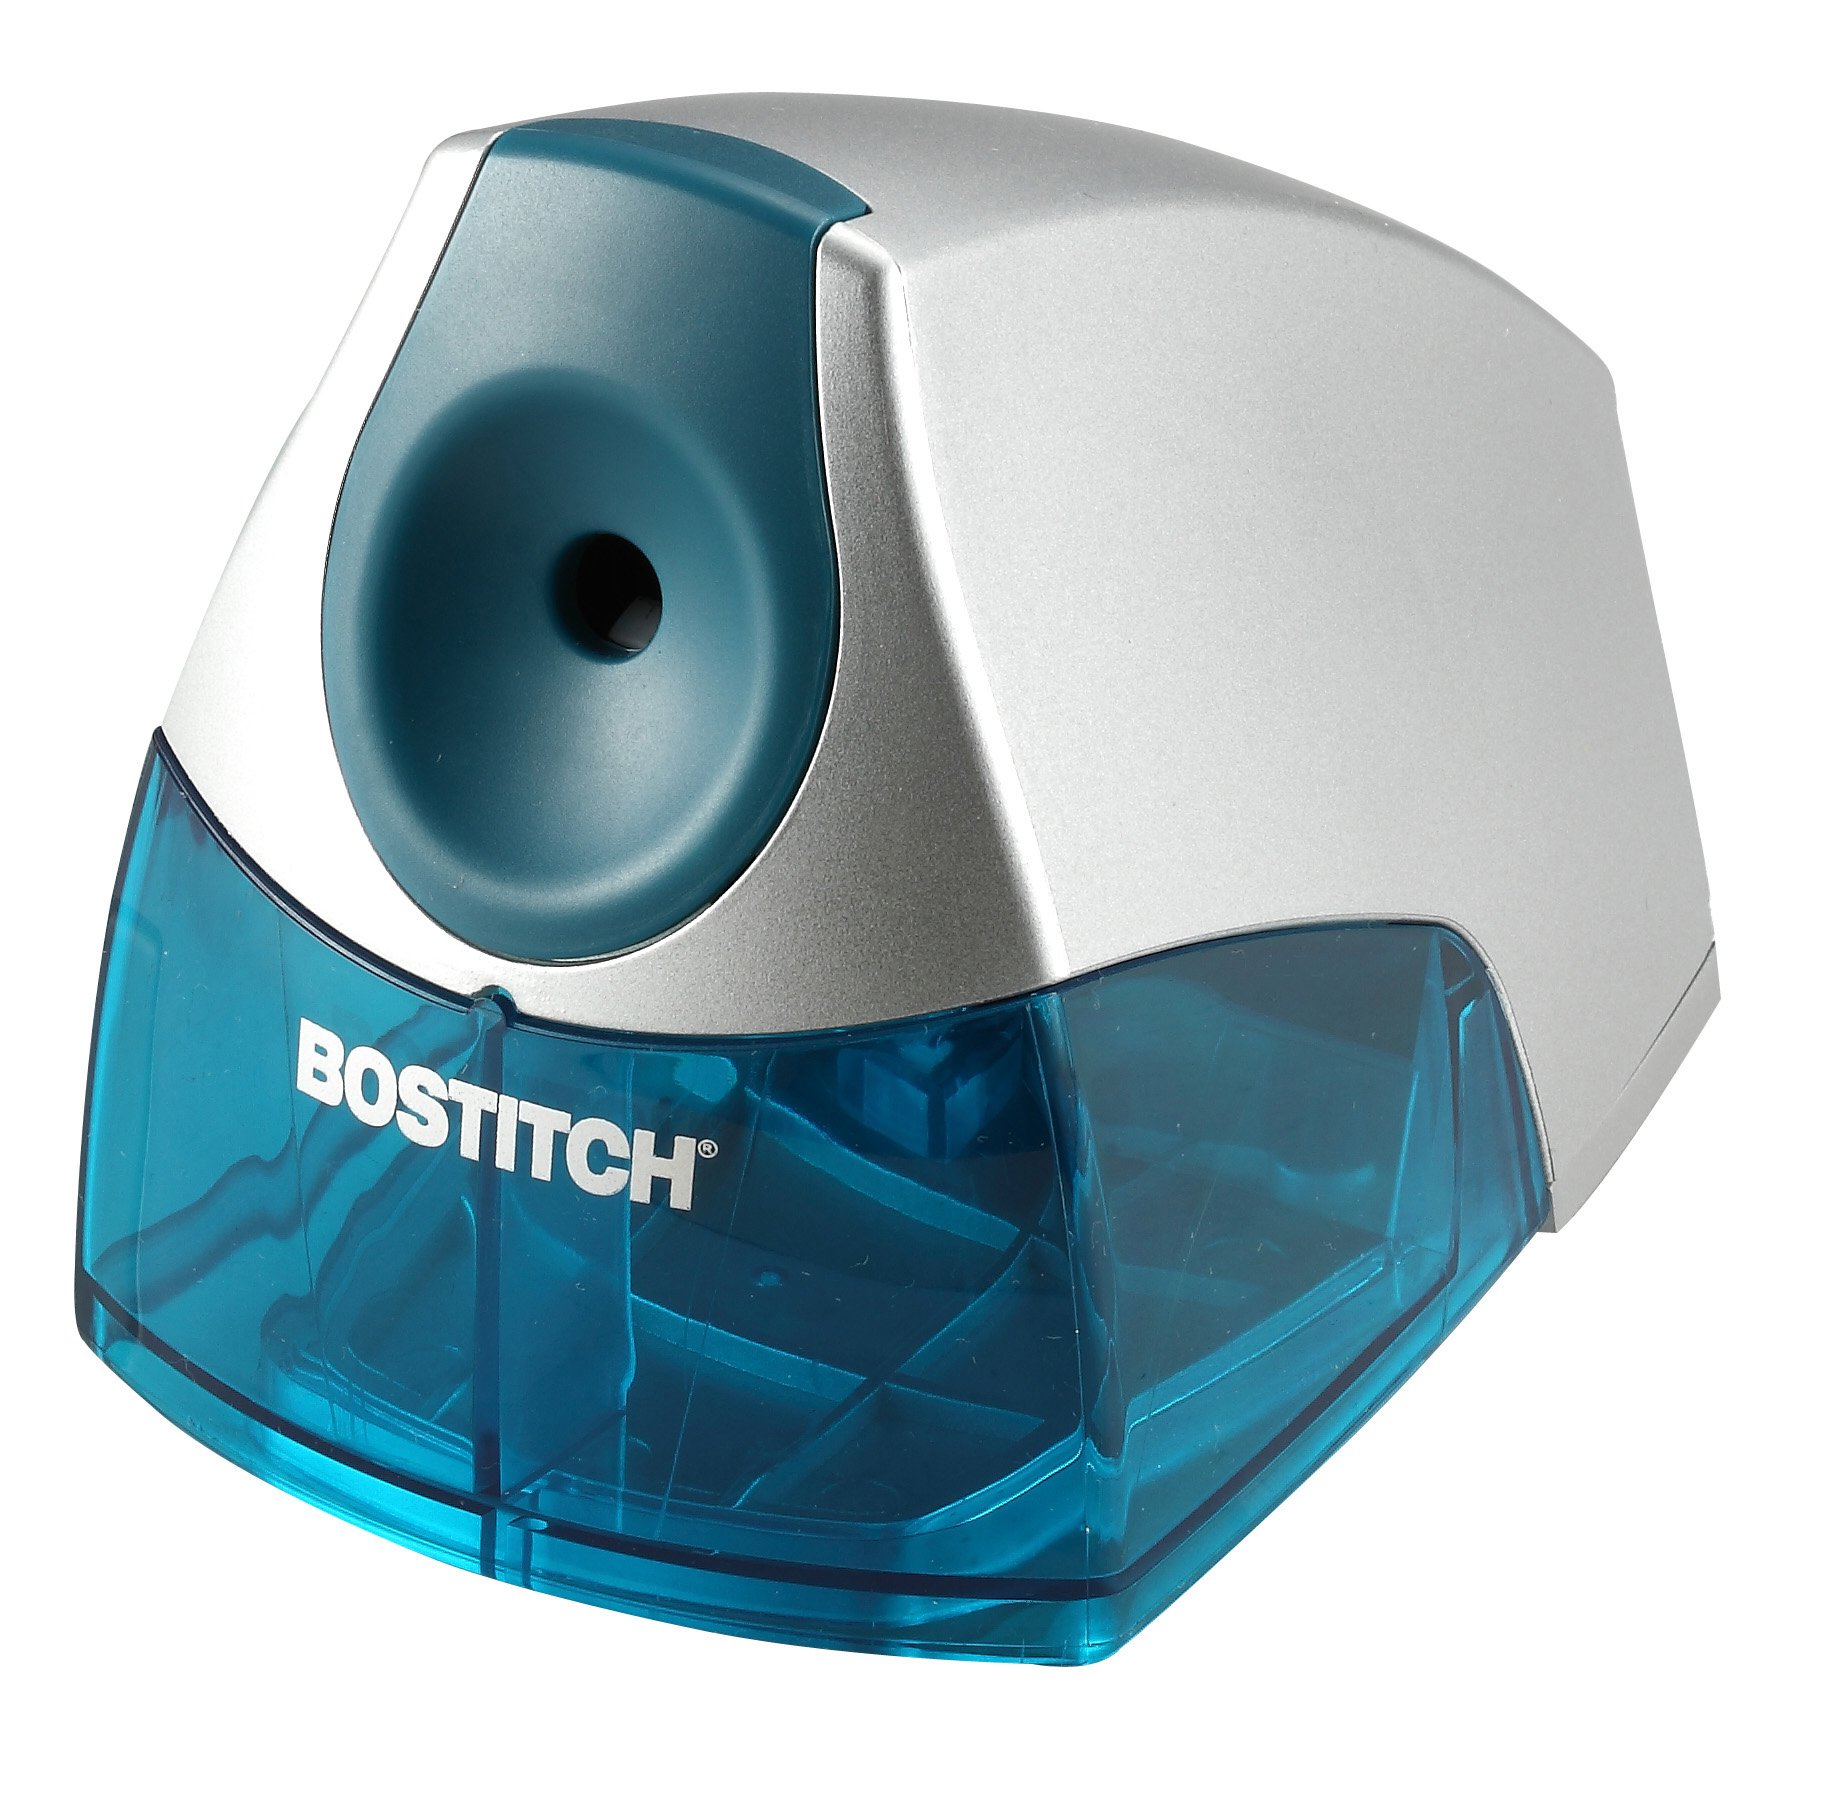 Bostitch Personal Electric Pencil Sharpener Powerful Stall-Free